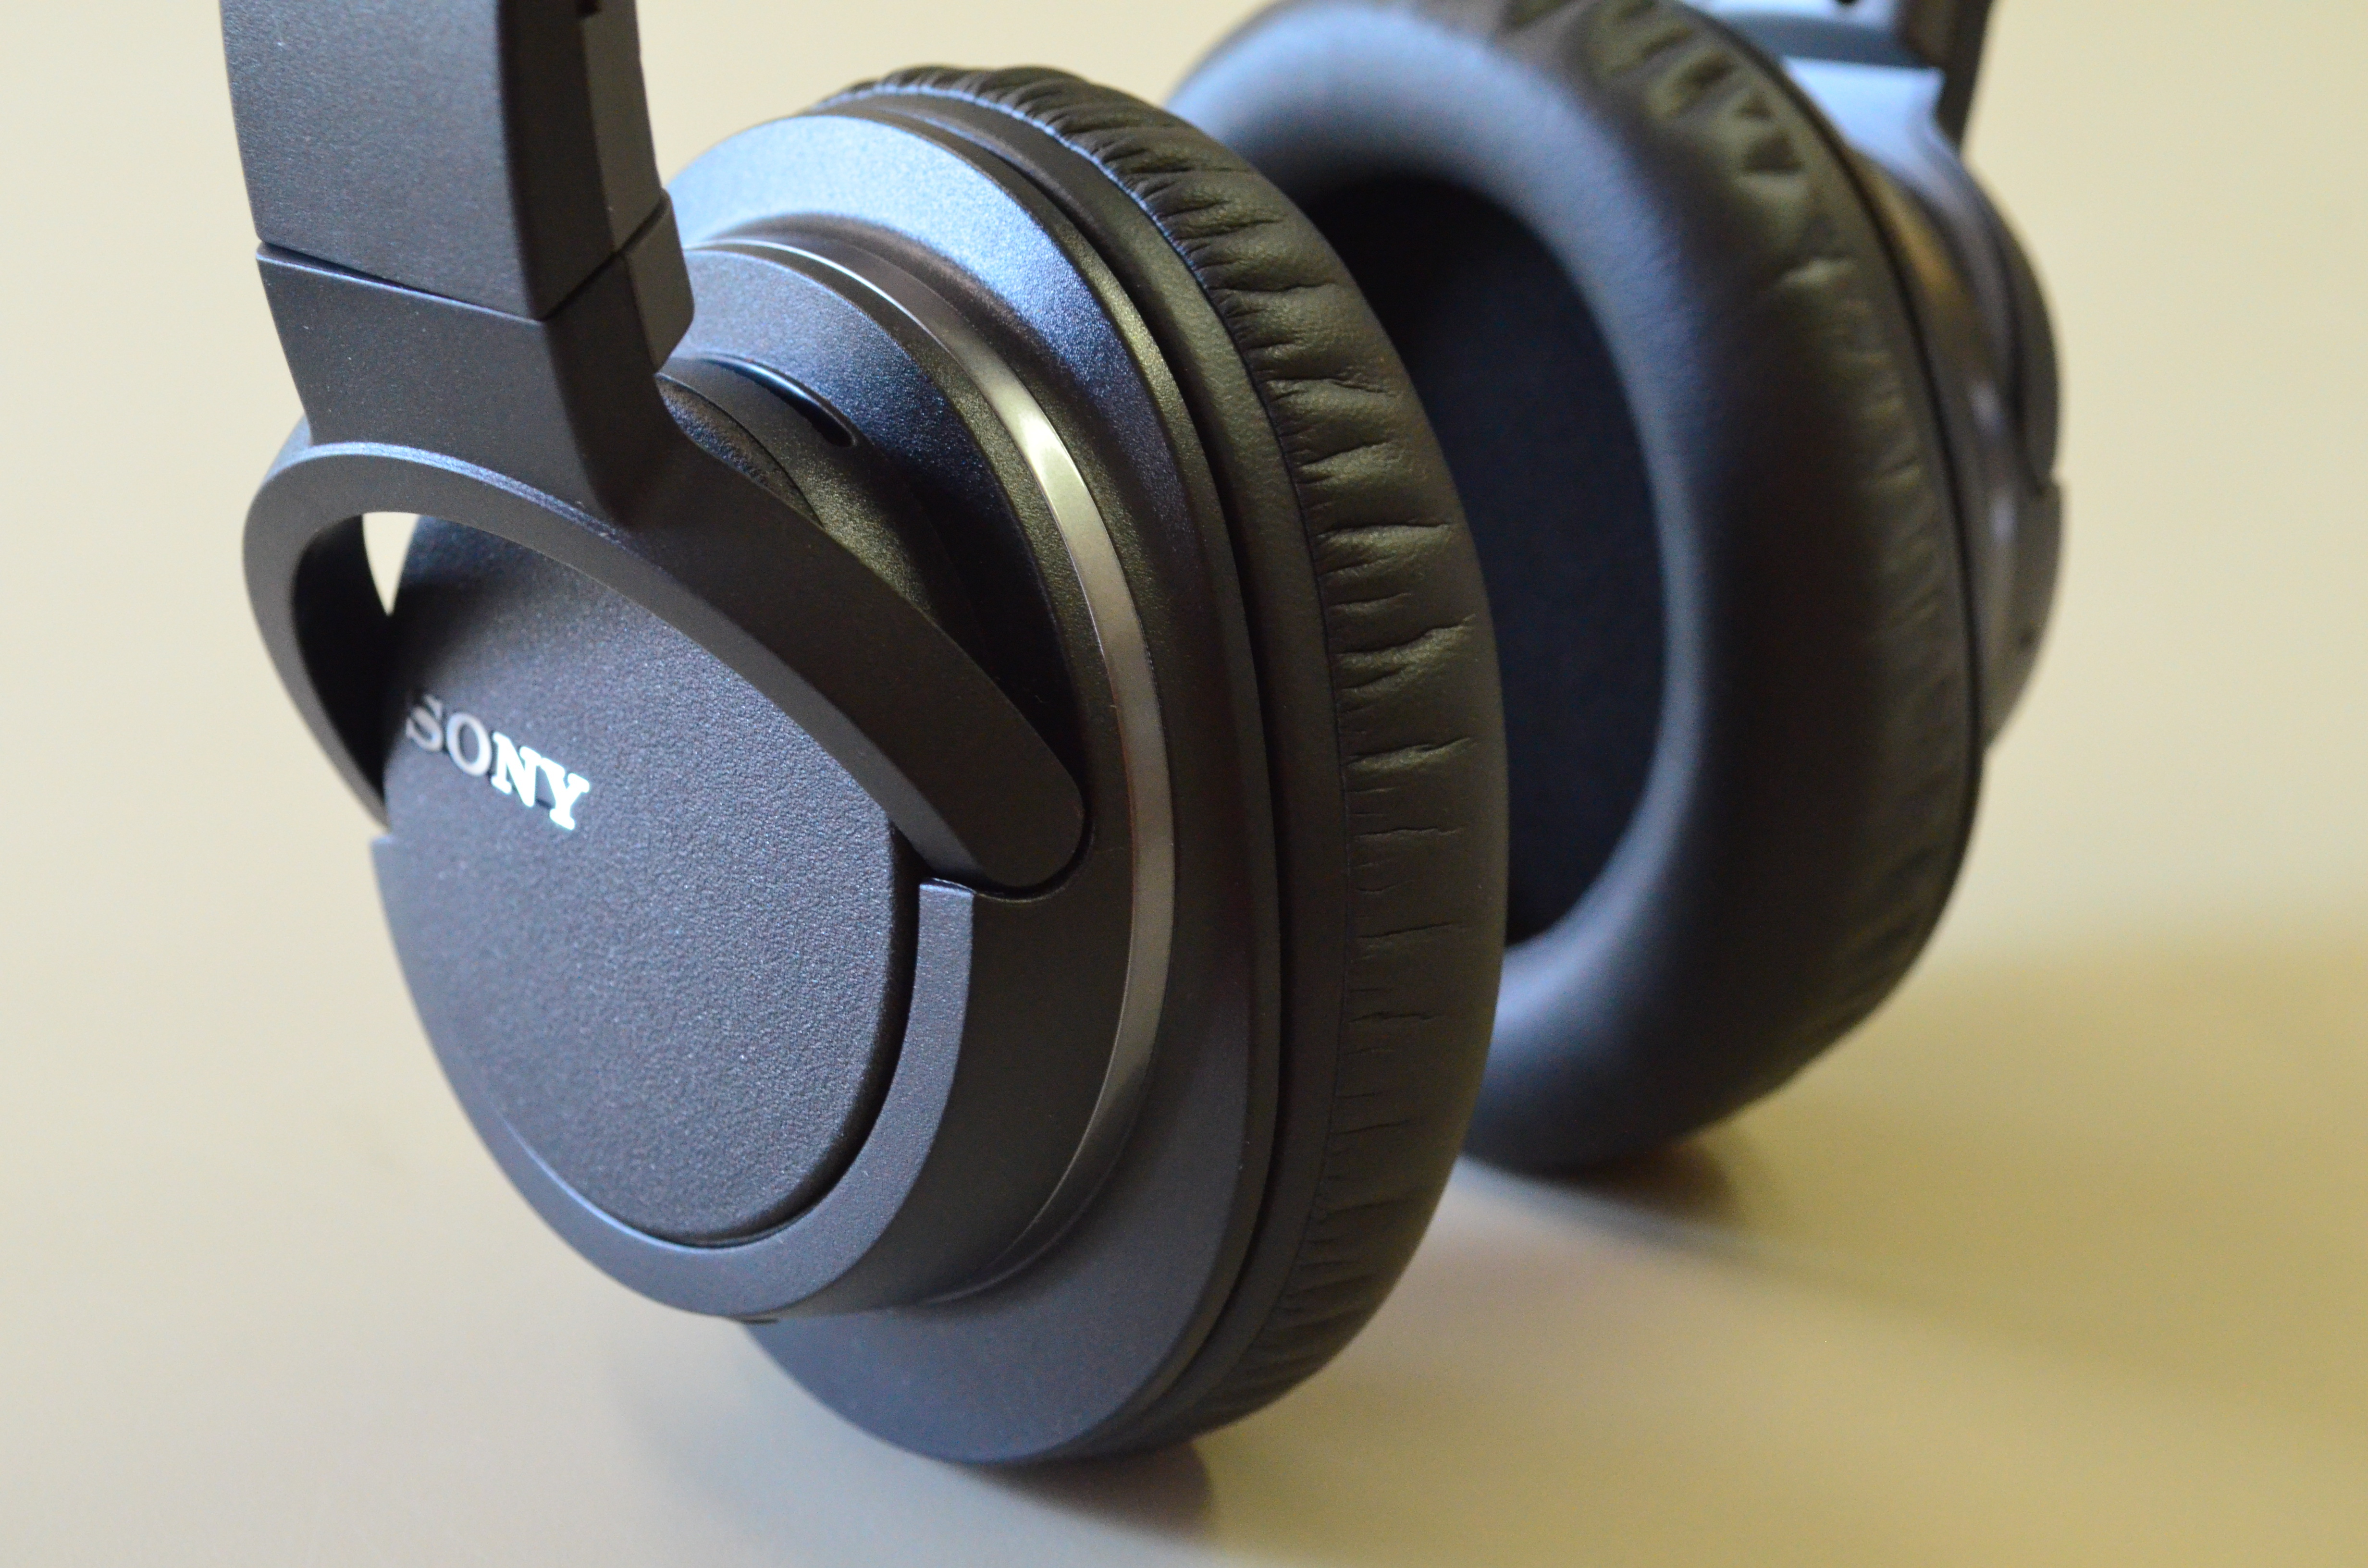 Sony Bluetooth Stereo Headset  Tech Review  Busted Wallet